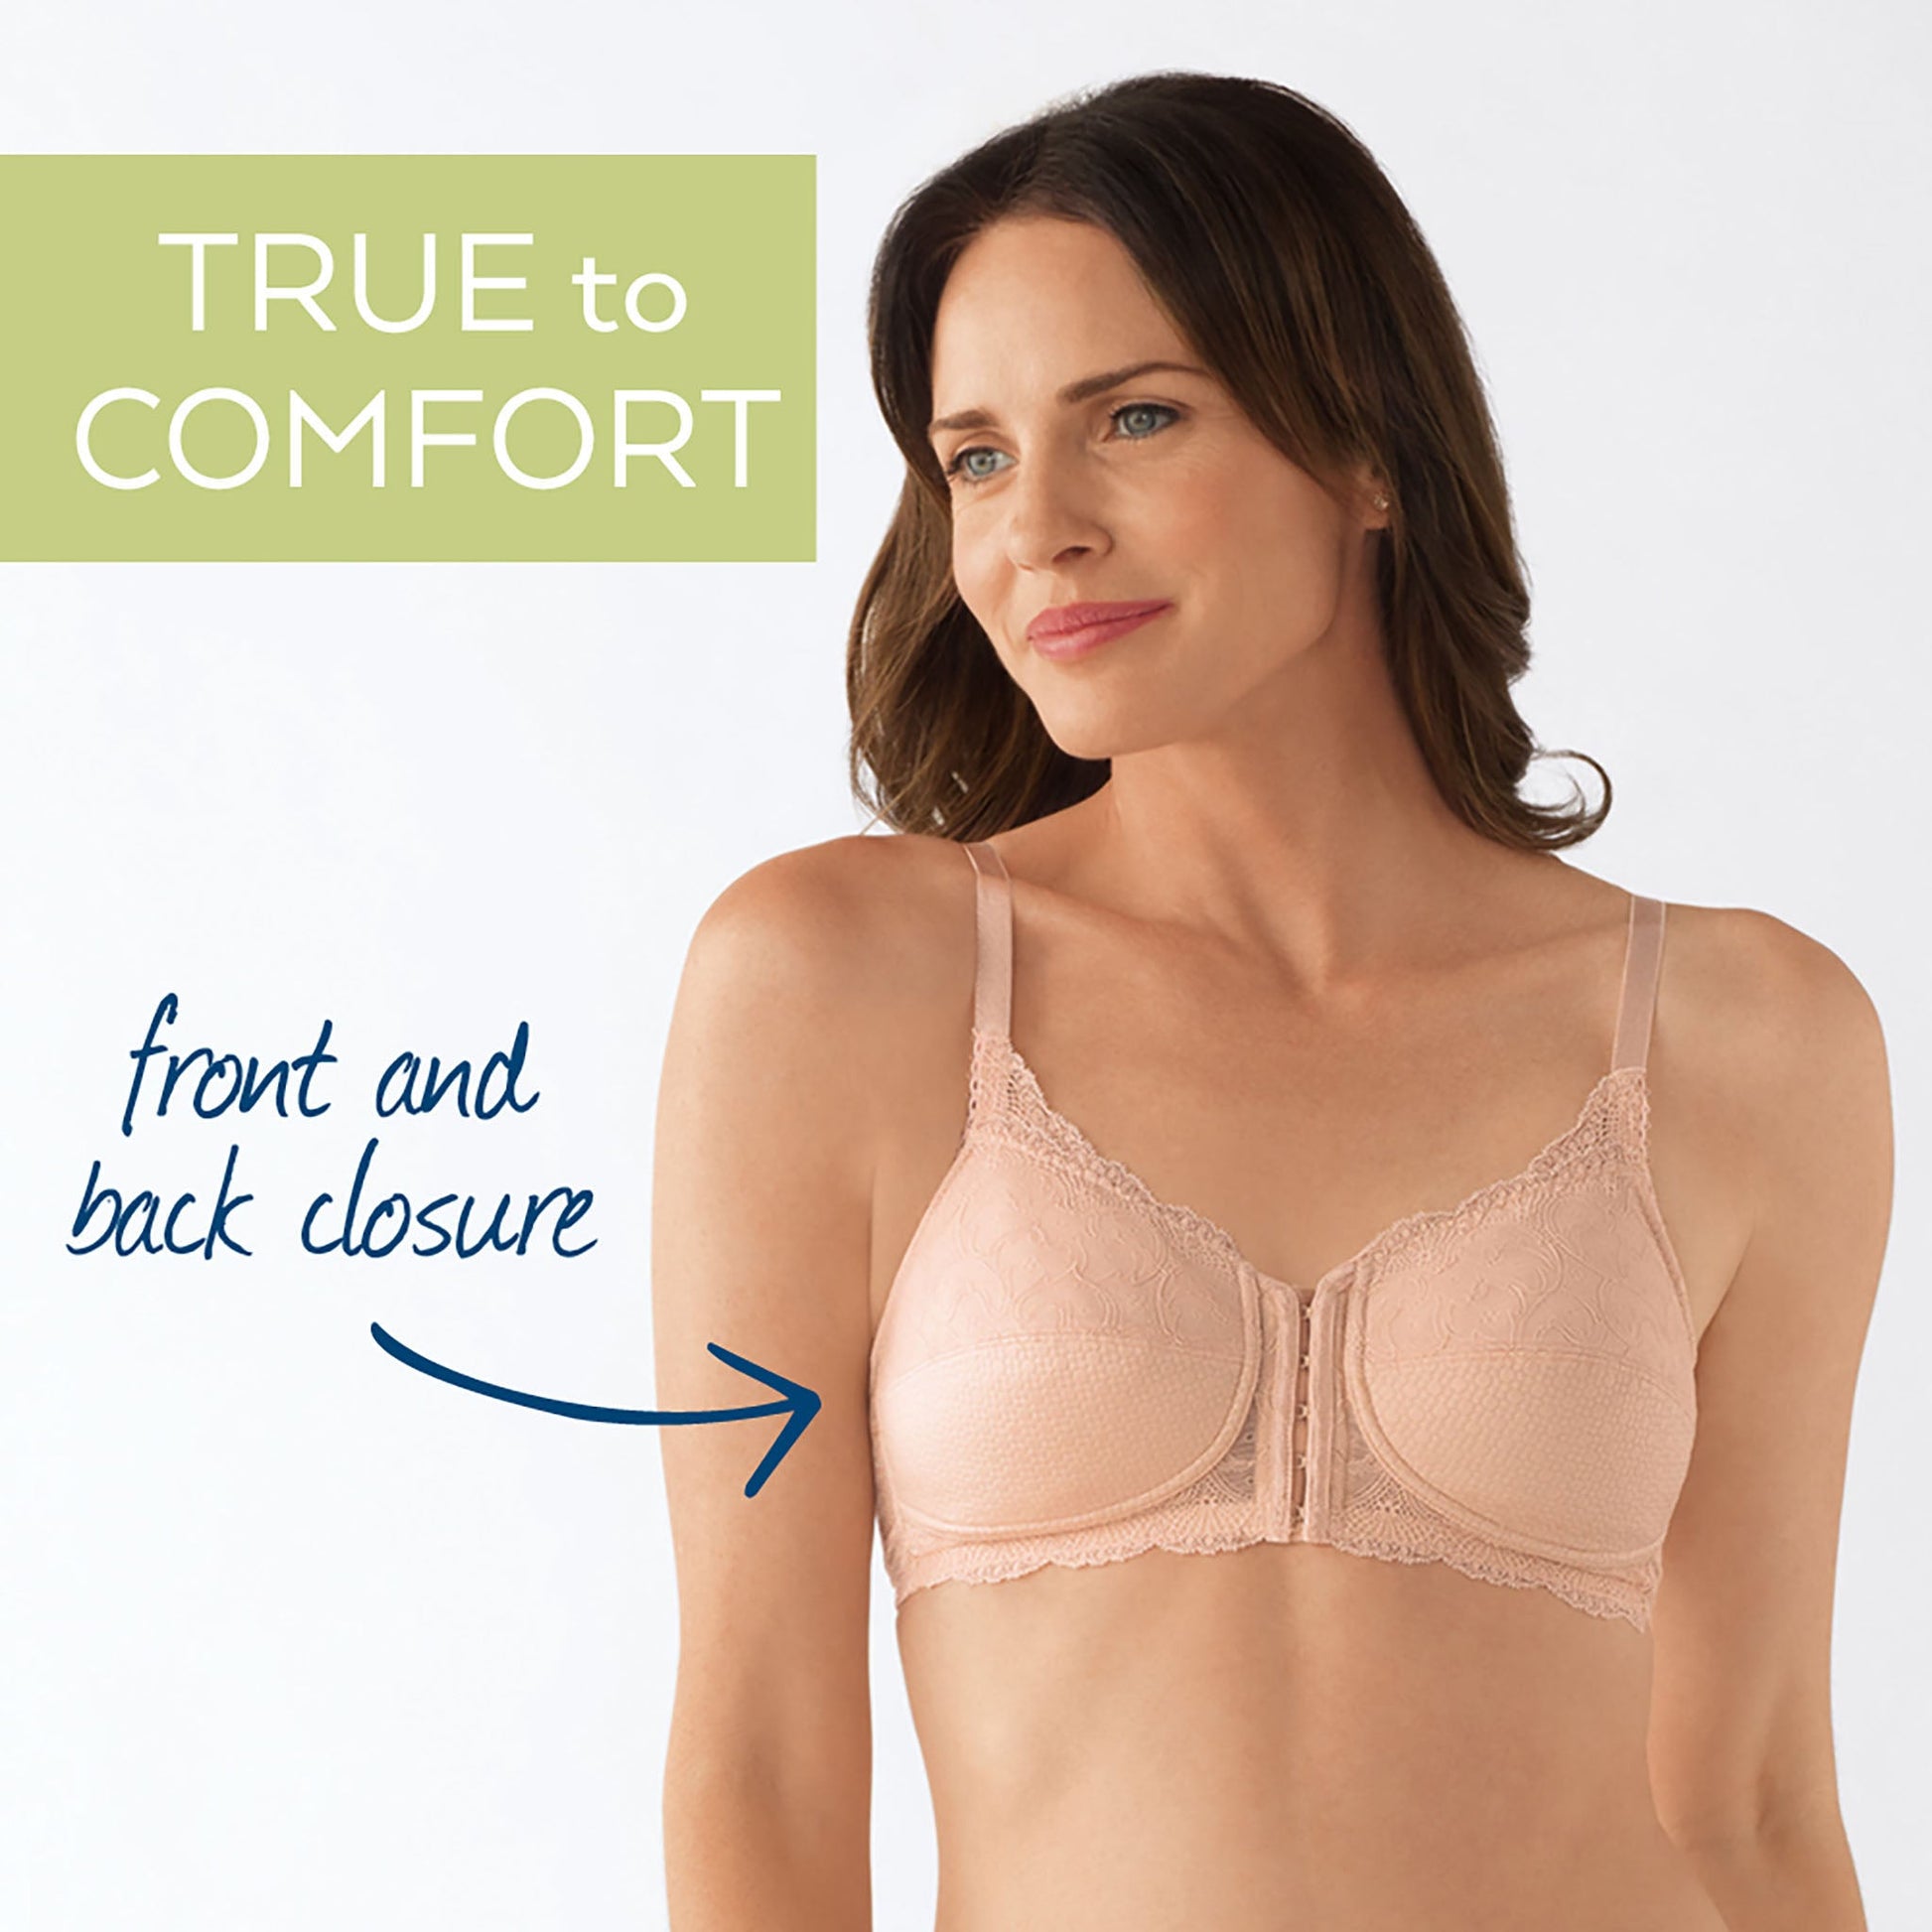 Ellen Post Surgical Front Closure Bra - Rose/Chai worn by model front view